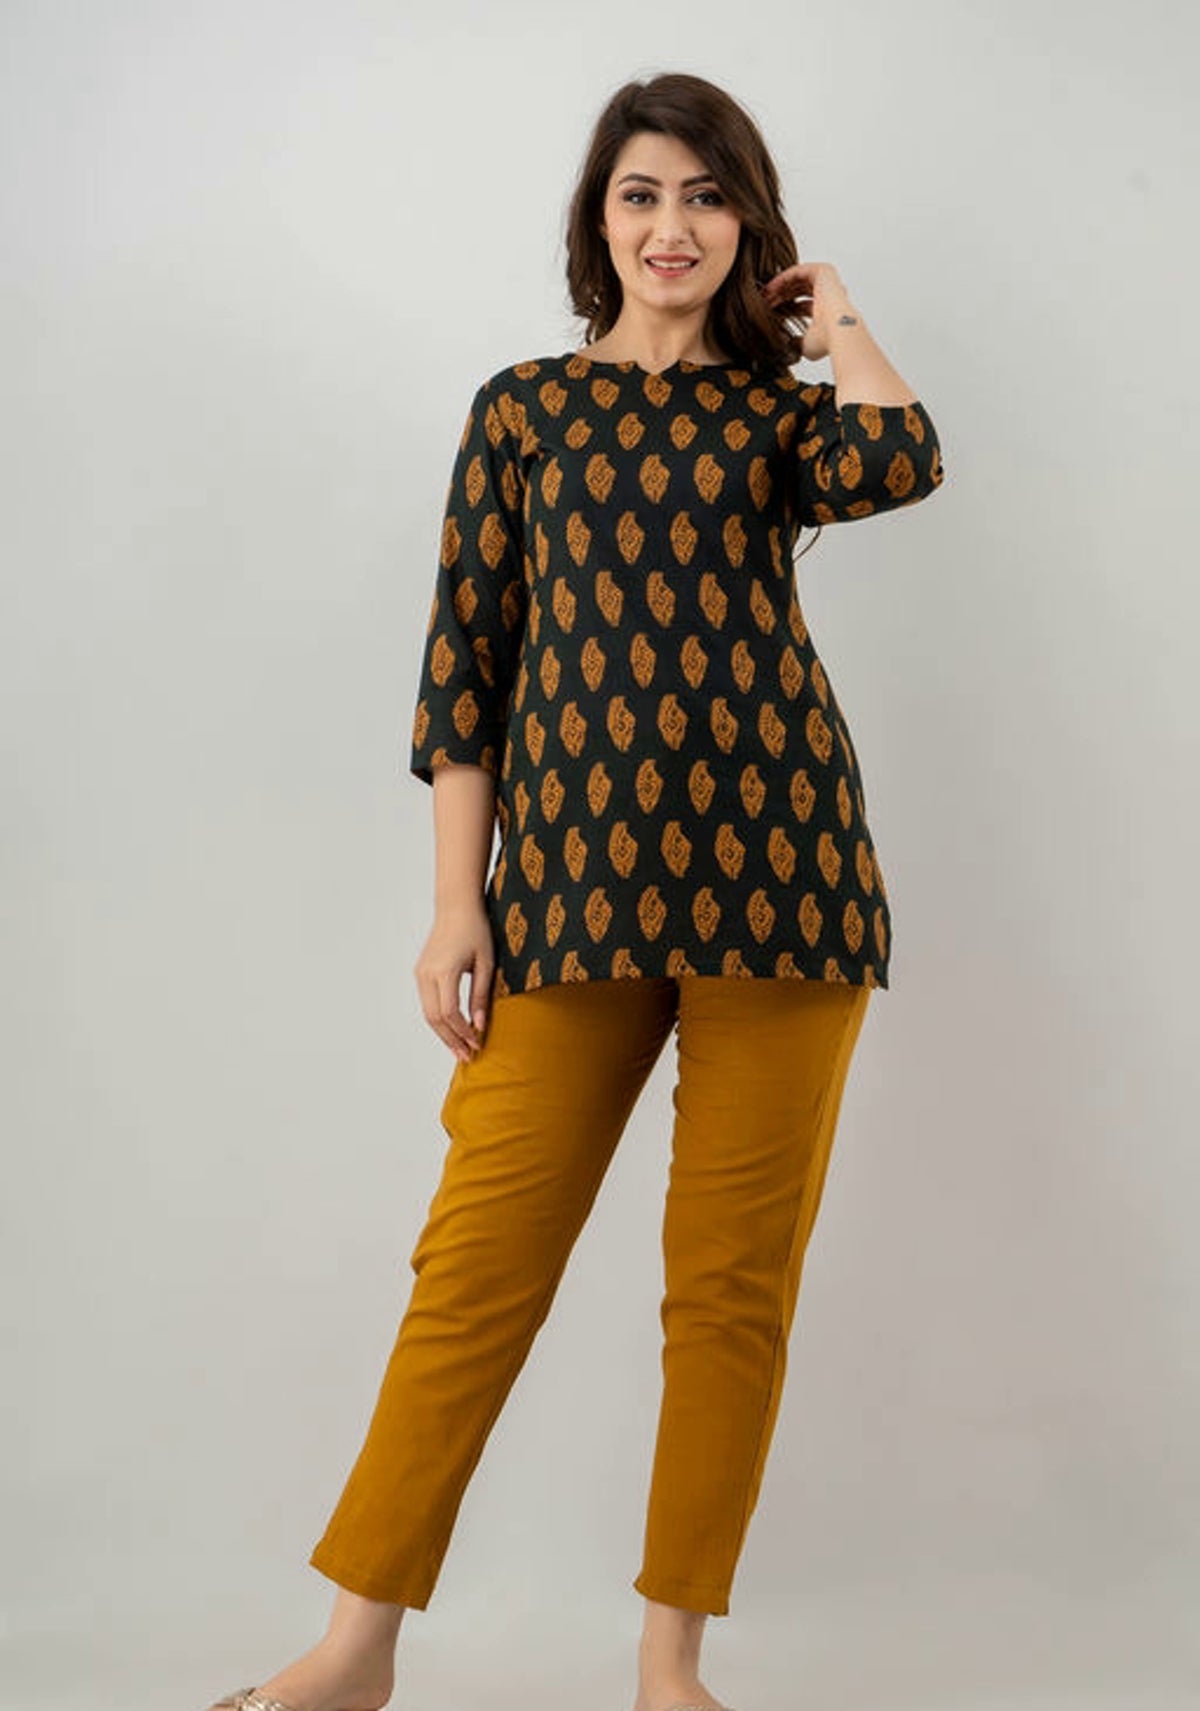 Women's Alluring Black and Mustard Contrast Cotton Lounge Wear